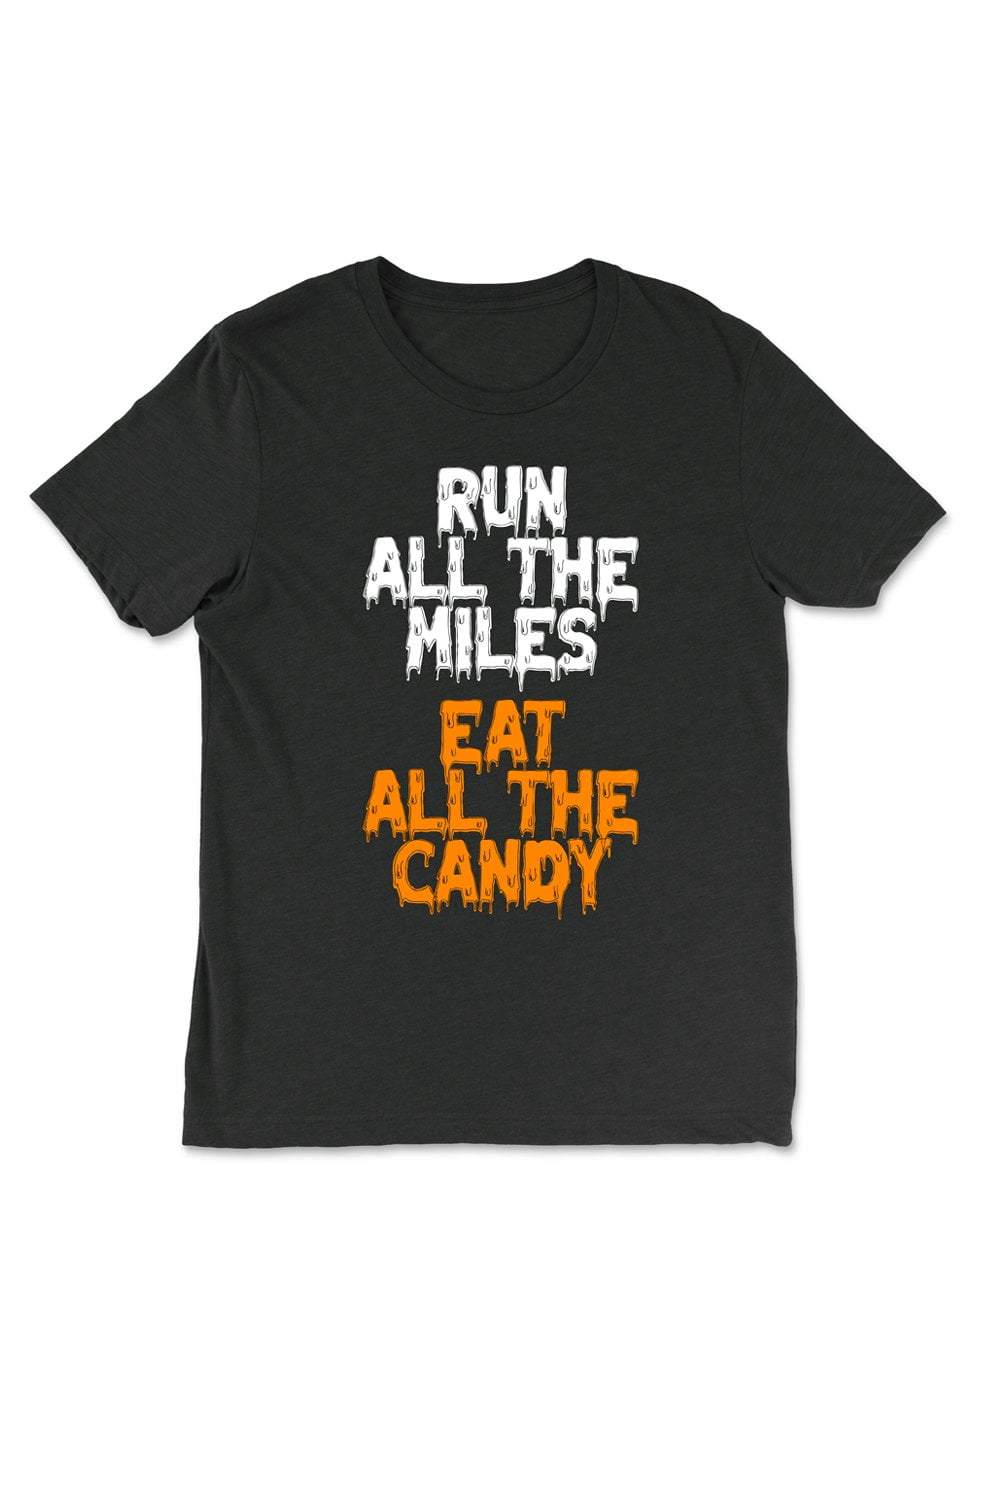 Sarah Marie Design Studio Unisex Tee Run All The Miles, Eat All The Candy T-Shirt